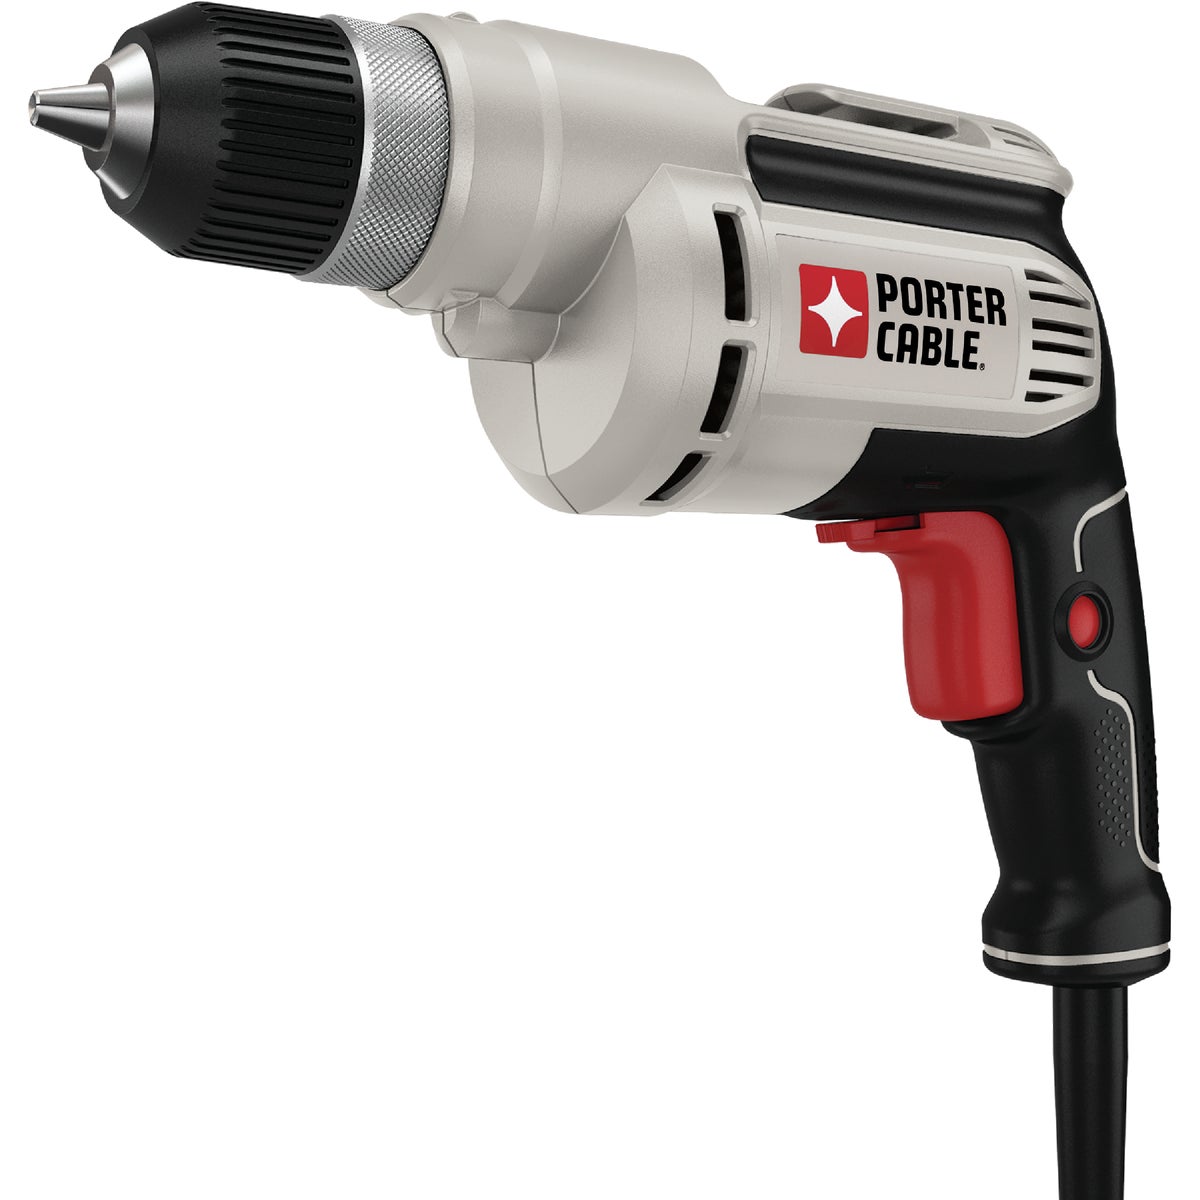 Porter Cable 3/8 In. 6-Amp Keyless Electric Drill